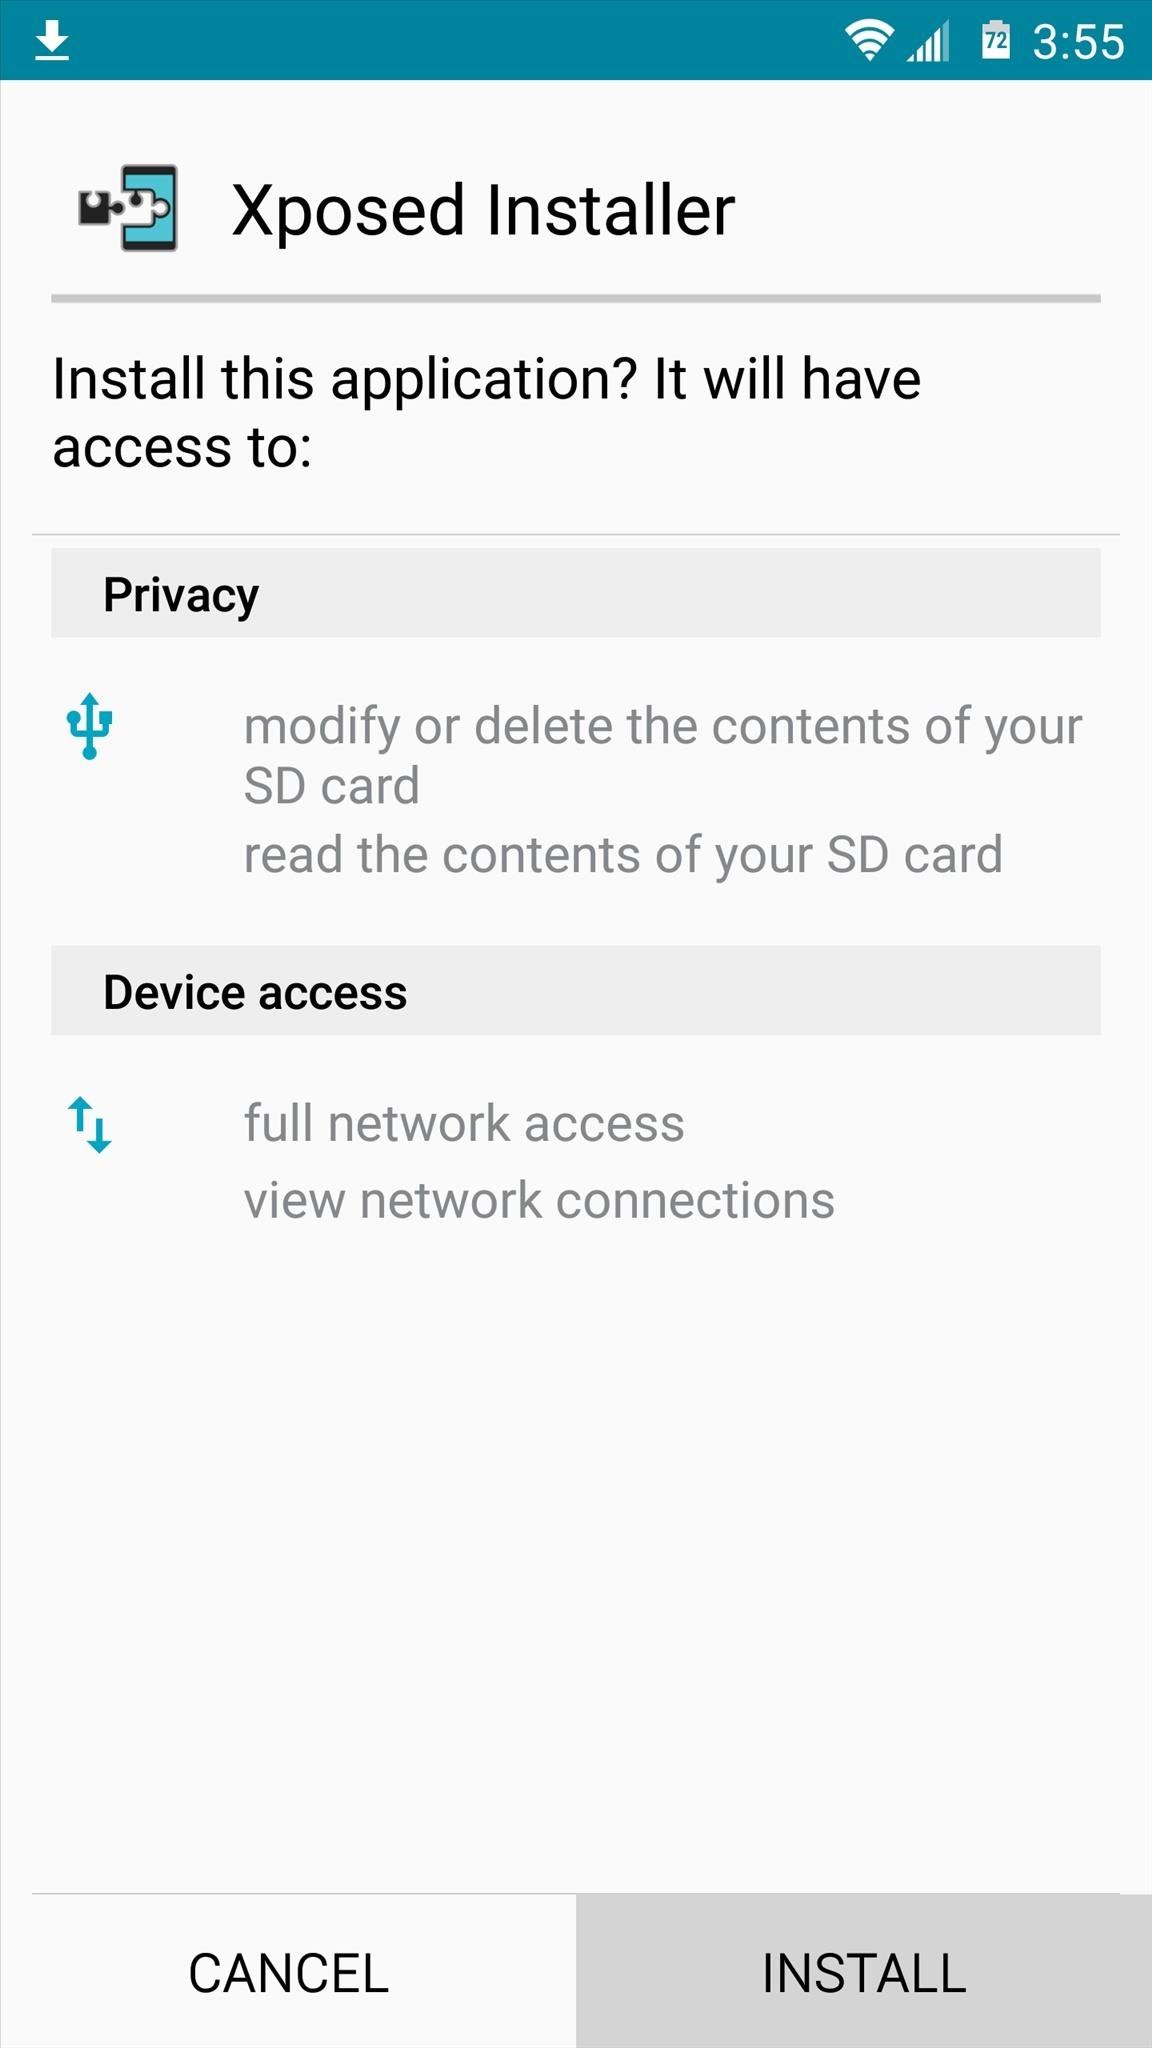 How to Install the Xposed Framework on Your Samsung Galaxy S6 or S6 Edge